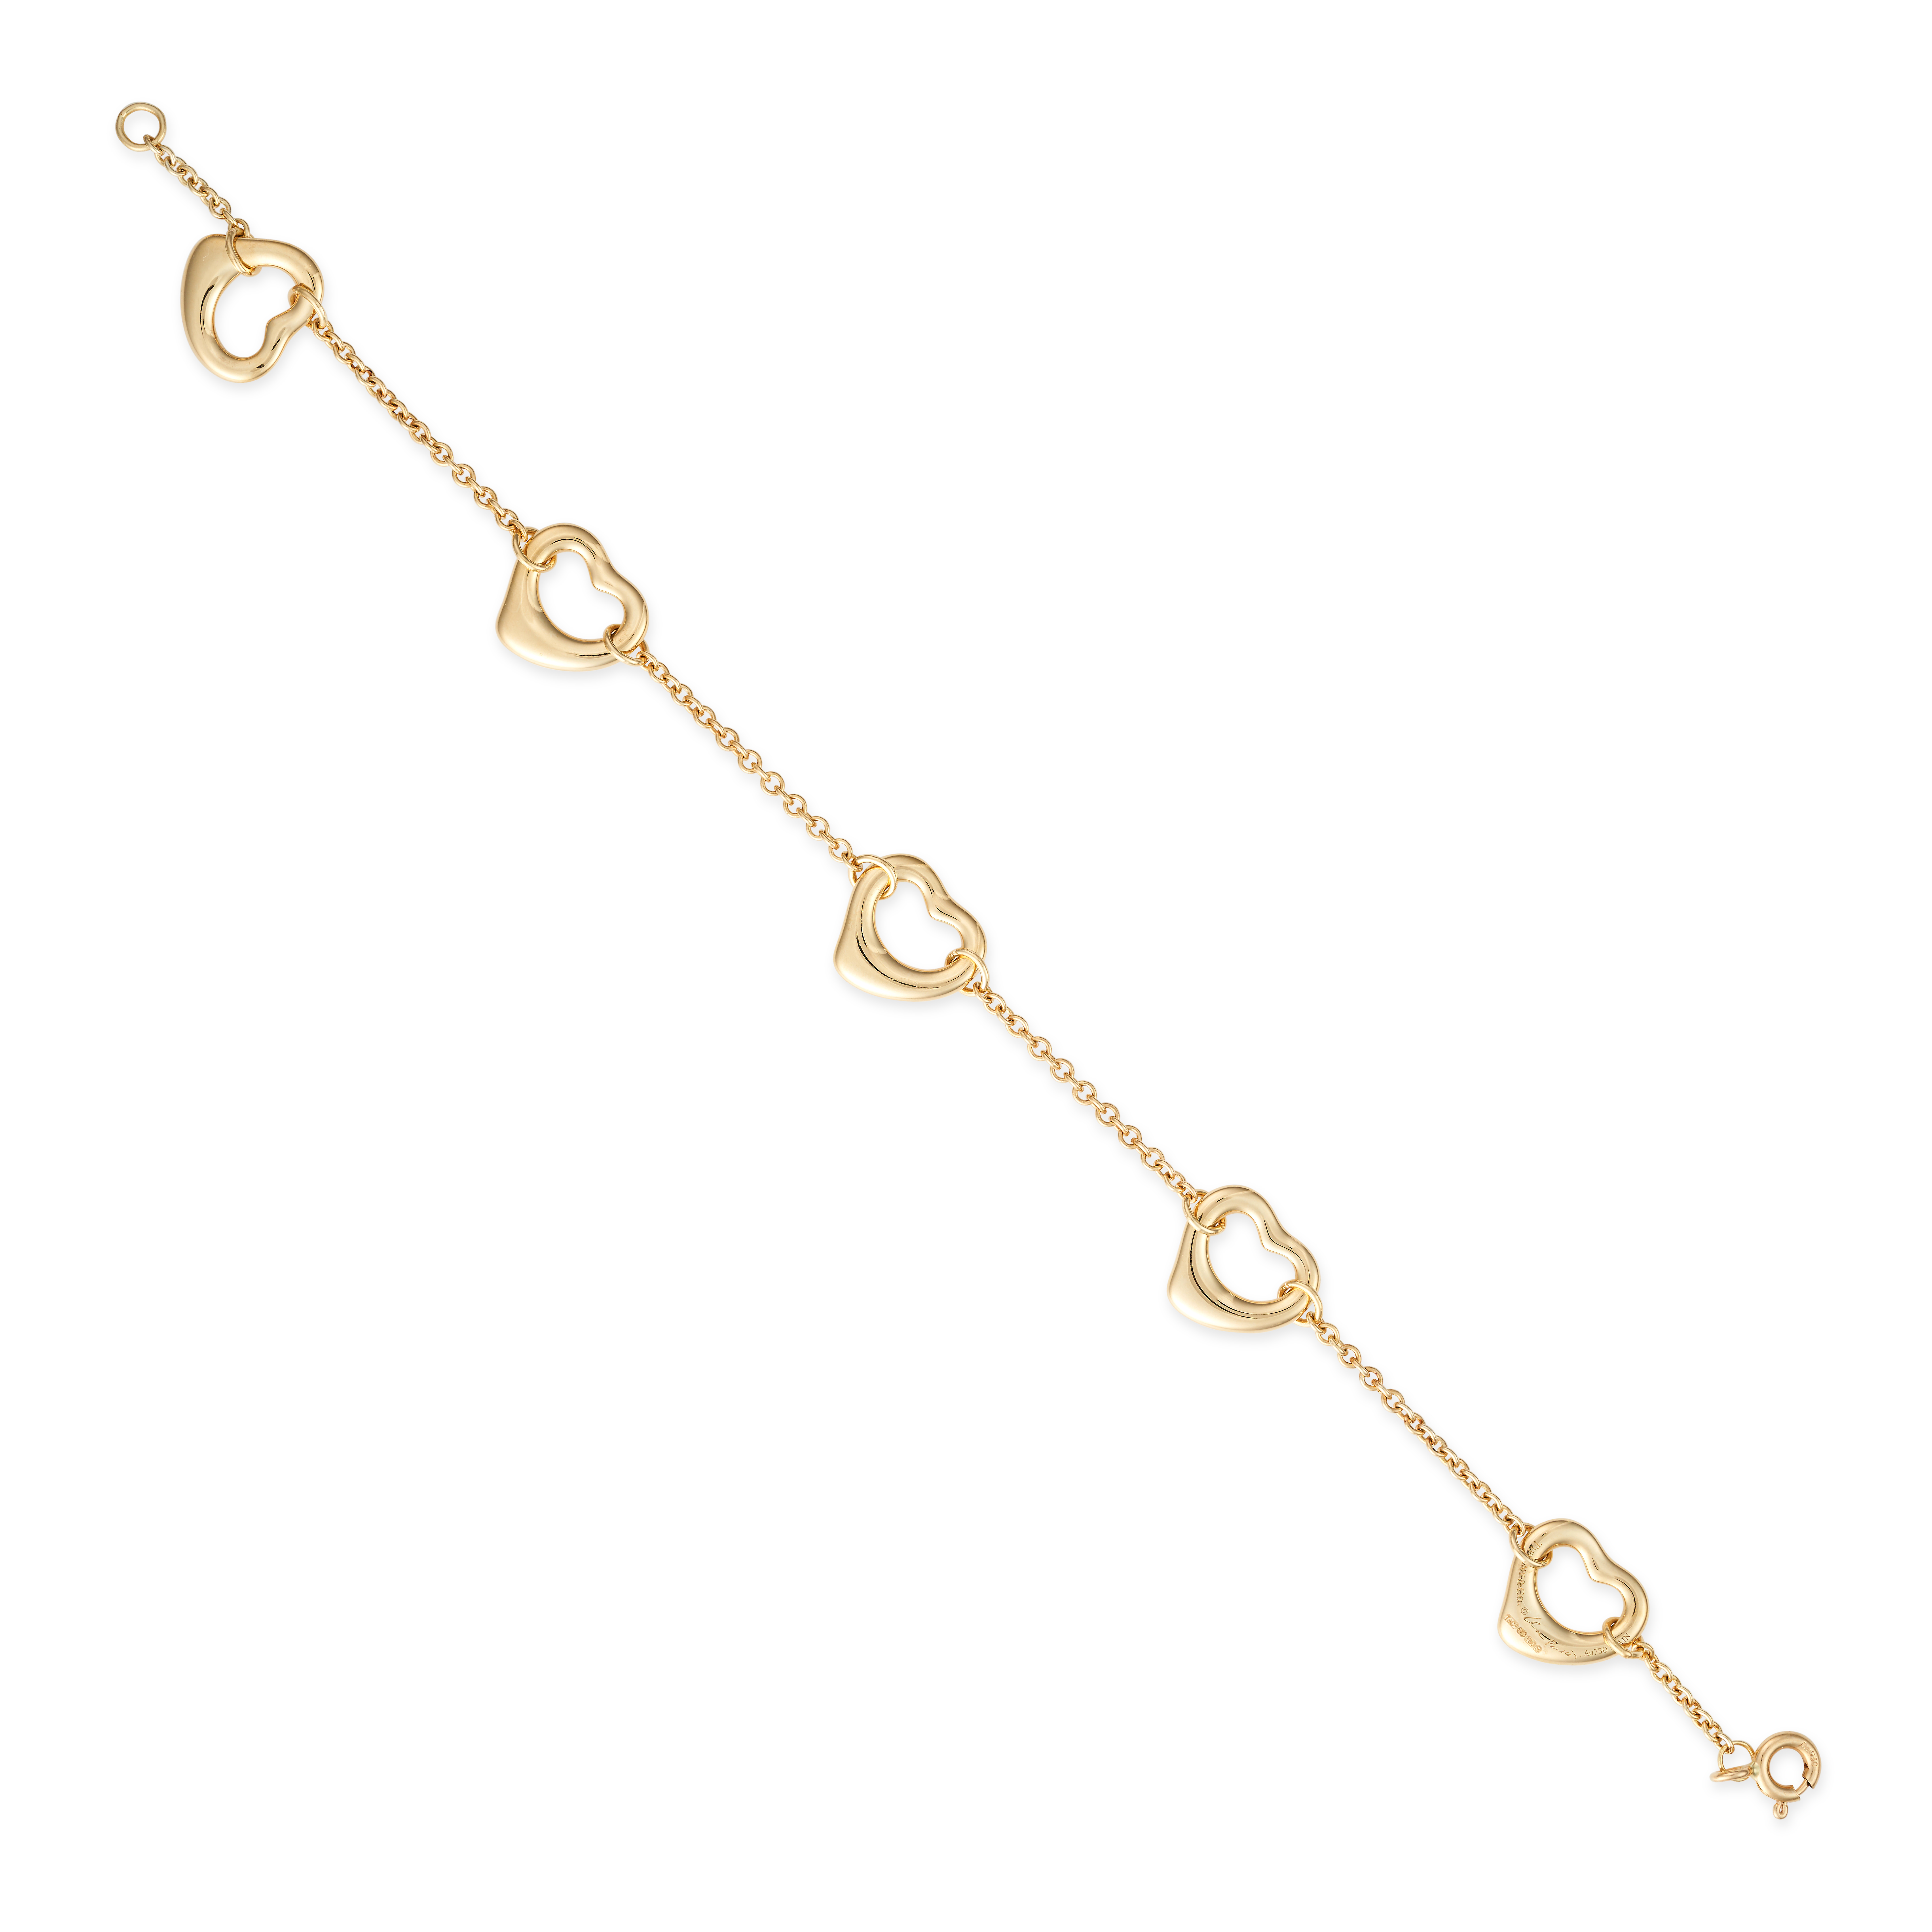 ELSA PERETTI FOR TIFFANY & CO., AN OPEN HEART BRACELET in 18ct yellow gold, comprising a trace ch...